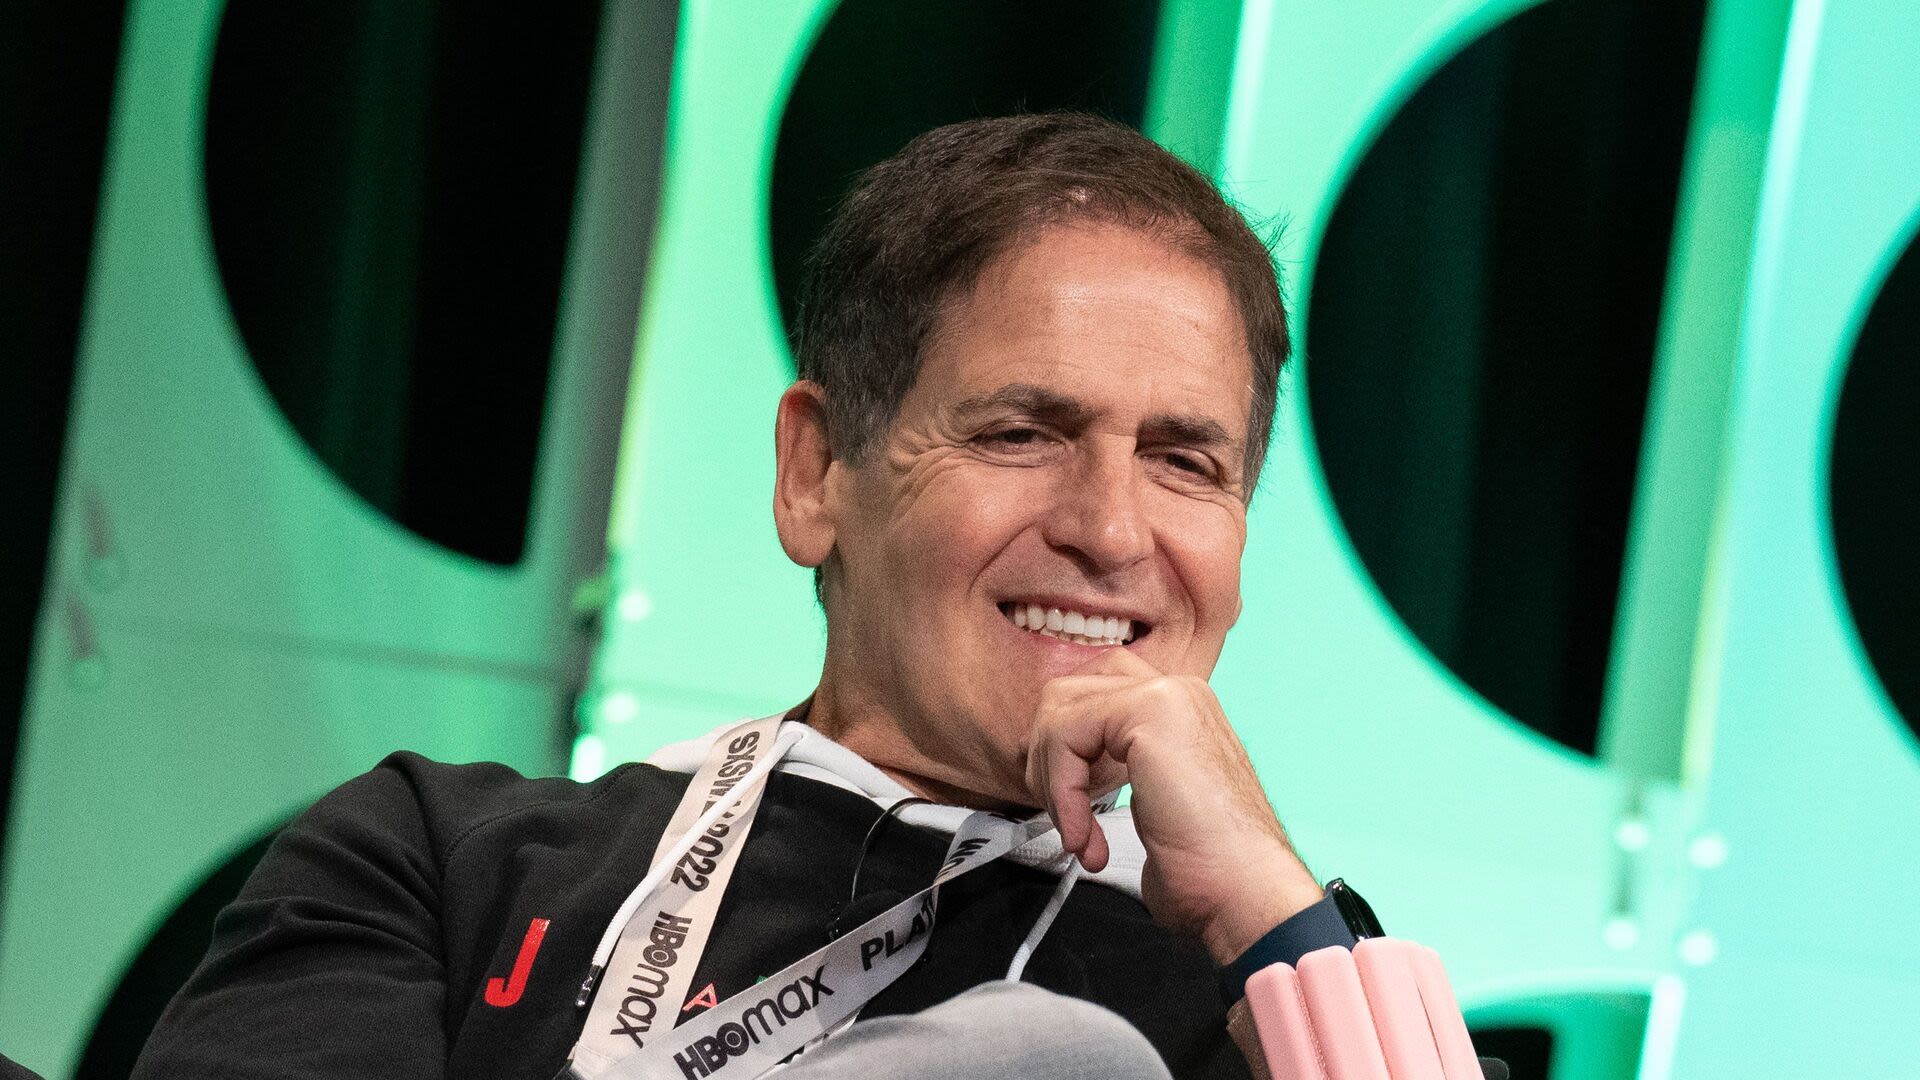 Mark Cuban: Here’s Why I Don’t Spend Money on a Chauffeur or Cleaning Services